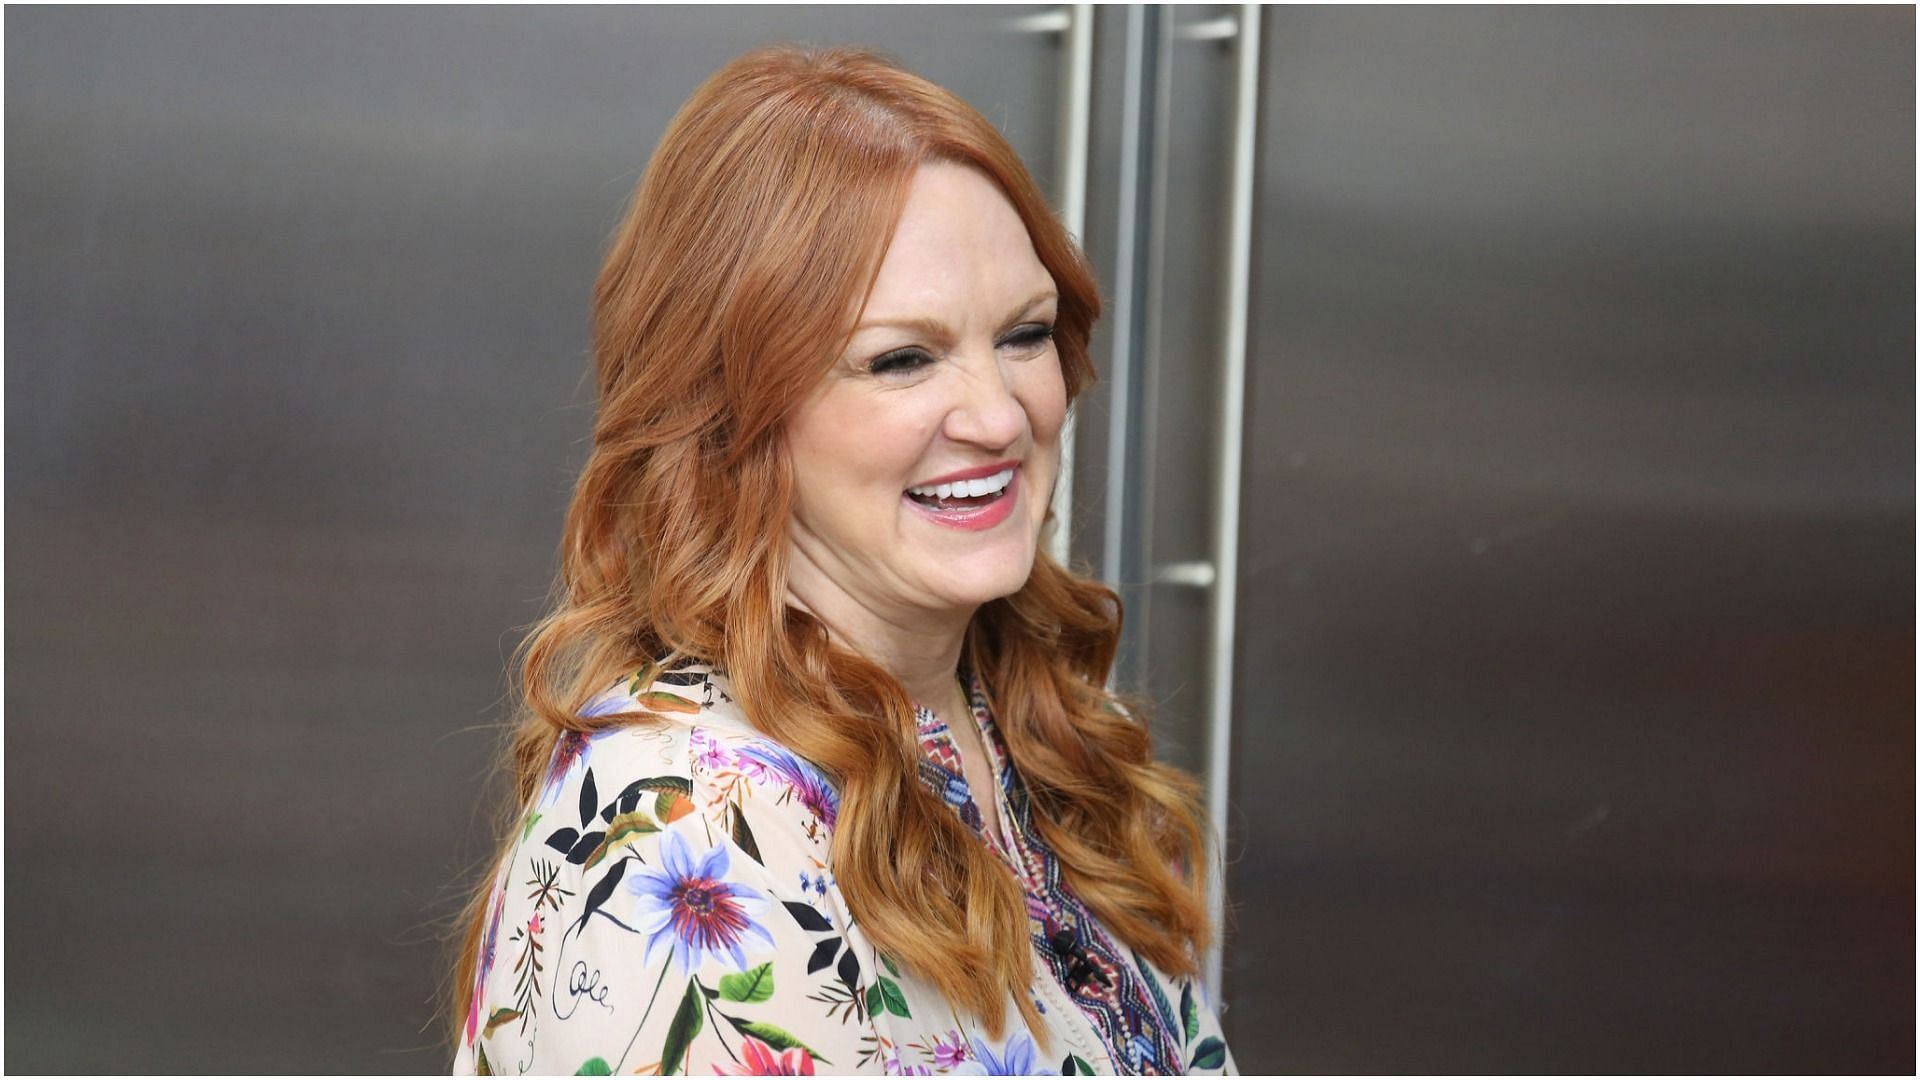 Ree Drummond celebrated Christmas with four of her five kids (Image by Tyler Essary via Getty Images)